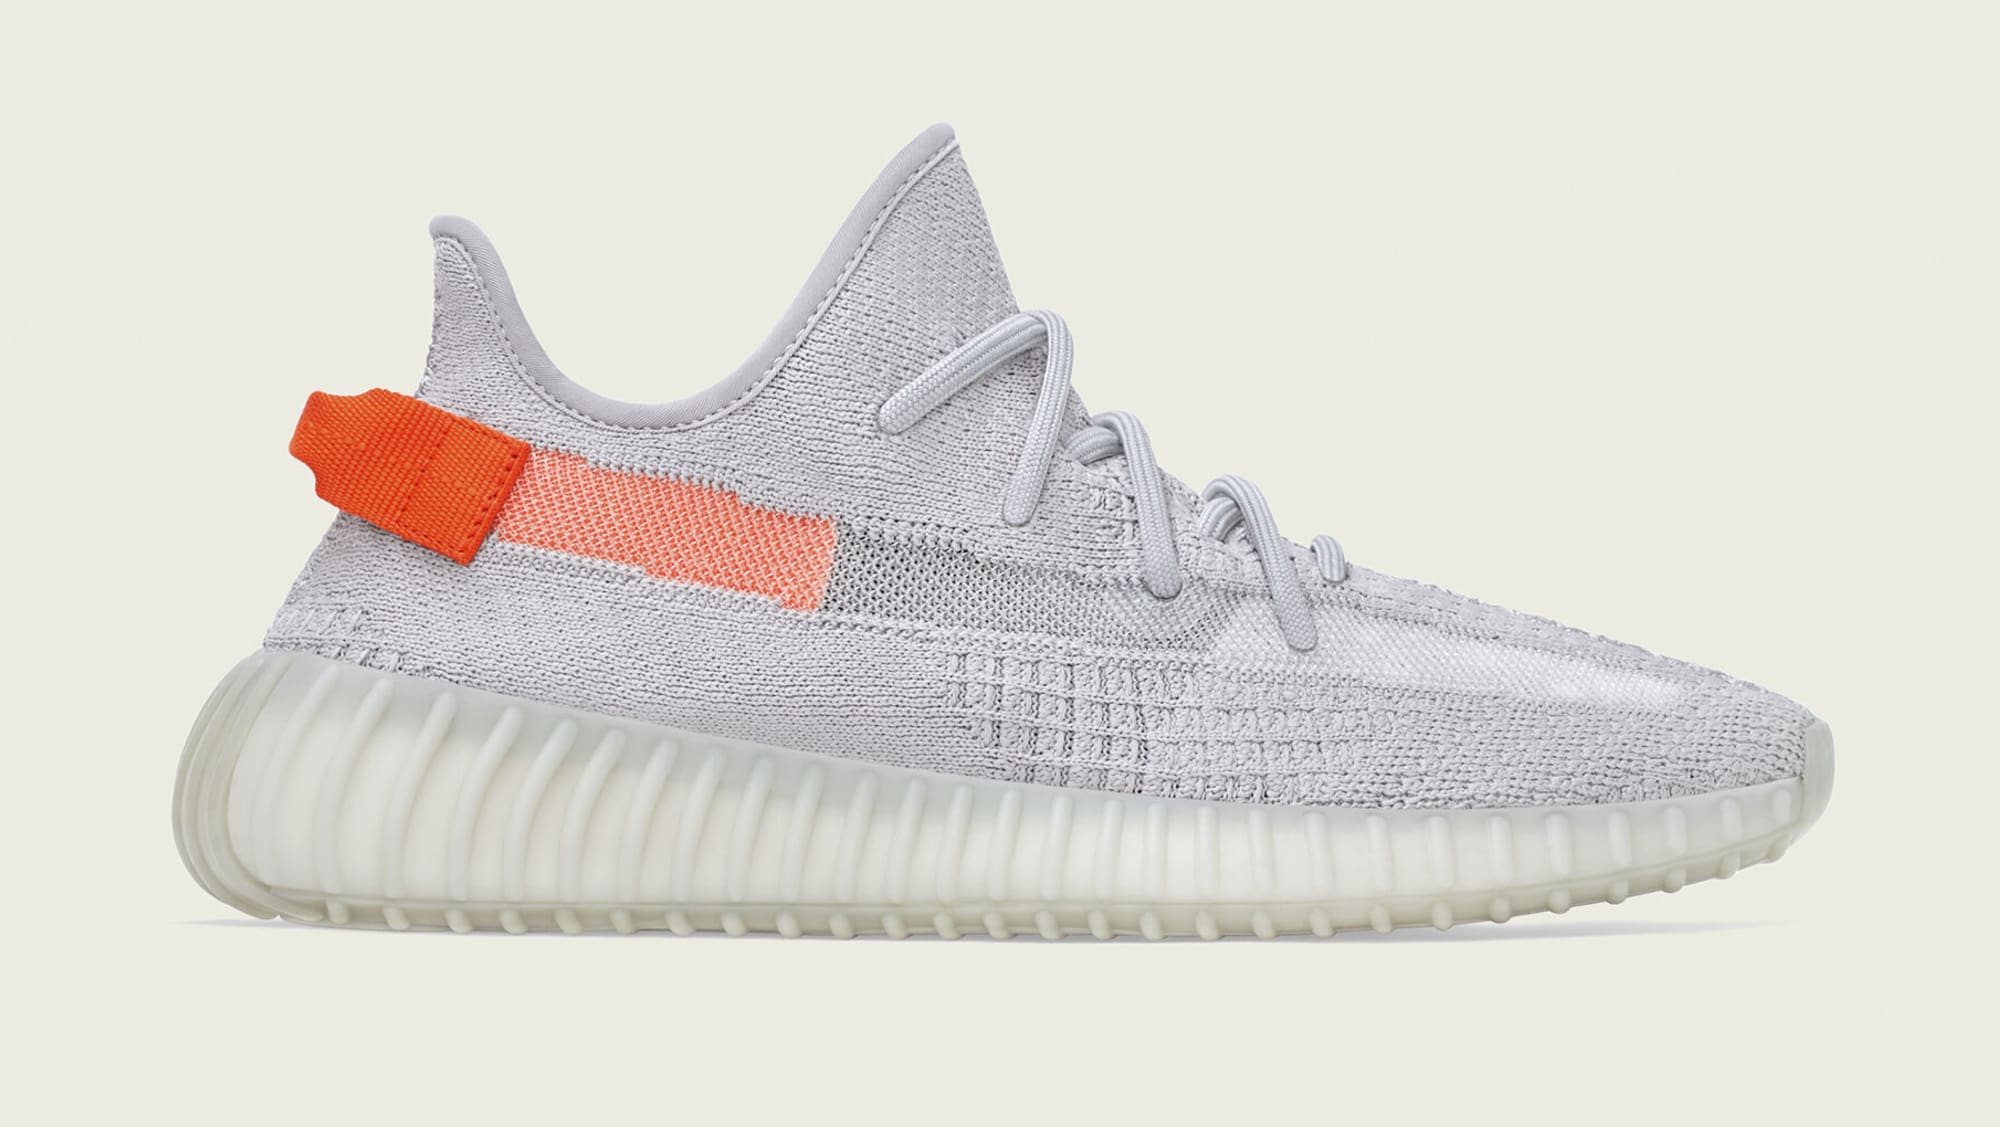 adidas-yeezy-boost-350-v2-tail-light-fx9017-release-date